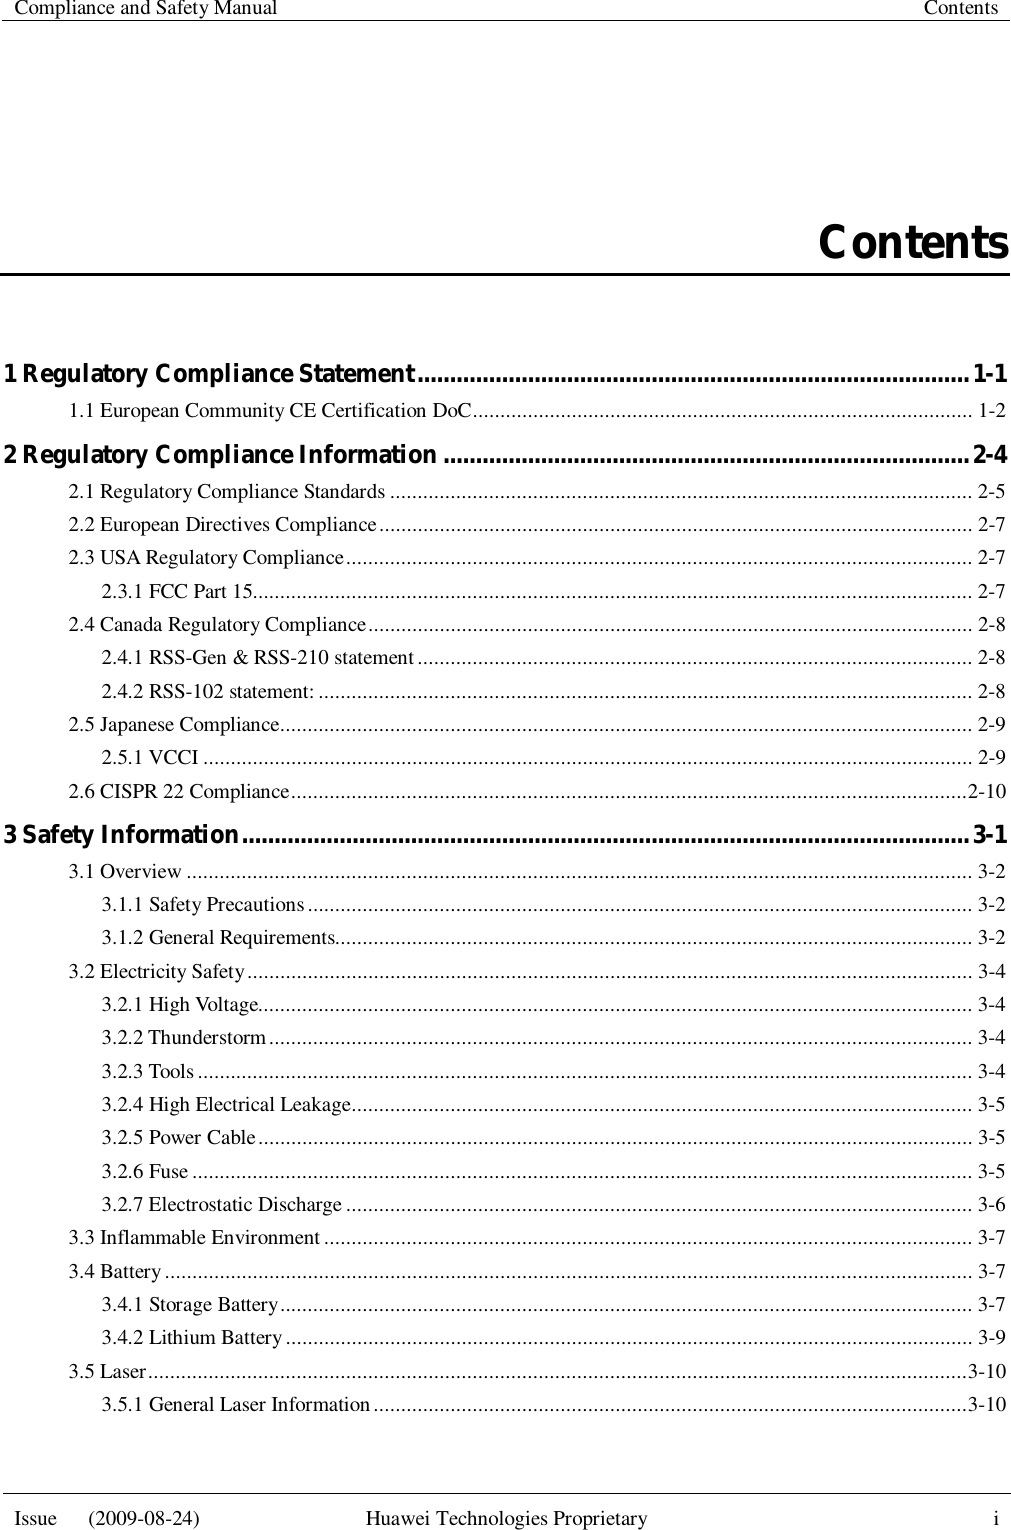   Compliance and Safety Manual  Contents  Issue   (2009-08-24)  Huawei Technologies Proprietary  i  Contents 1 Regulatory Compliance Statement ..................................................................................... 1-1 1.1 European Community CE Certification DoC ........................................................................................... 1-2 2 Regulatory Compliance Information ................................................................................. 2-4 2.1 Regulatory Compliance Standards .......................................................................................................... 2-5 2.2 European Directives Compliance ............................................................................................................ 2-7 2.3 USA Regulatory Compliance .................................................................................................................. 2-7 2.3.1 FCC Part 15................................................................................................................................... 2-7 2.4 Canada Regulatory Compliance .............................................................................................................. 2-8 2.4.1 RSS-Gen &amp; RSS-210 statement ..................................................................................................... 2-8 2.4.2 RSS-102 statement: ....................................................................................................................... 2-8 2.5 Japanese Compliance .............................................................................................................................. 2-9 2.5.1 VCCI ............................................................................................................................................ 2-9 2.6 CISPR 22 Compliance ........................................................................................................................... 2-10 3 Safety Information ................................................................................................................ 3-1 3.1 Overview ............................................................................................................................................... 3-2 3.1.1 Safety Precautions ......................................................................................................................... 3-2 3.1.2 General Requirements.................................................................................................................... 3-2 3.2 Electricity Safety .................................................................................................................................... 3-4 3.2.1 High Voltage.................................................................................................................................. 3-4 3.2.2 Thunderstorm ................................................................................................................................ 3-4 3.2.3 Tools ............................................................................................................................................. 3-4 3.2.4 High Electrical Leakage ................................................................................................................. 3-5 3.2.5 Power Cable .................................................................................................................................. 3-5 3.2.6 Fuse .............................................................................................................................................. 3-5 3.2.7 Electrostatic Discharge .................................................................................................................. 3-6 3.3 Inflammable Environment ...................................................................................................................... 3-7 3.4 Battery ................................................................................................................................................... 3-7 3.4.1 Storage Battery .............................................................................................................................. 3-7 3.4.2 Lithium Battery ............................................................................................................................. 3-9 3.5 Laser ..................................................................................................................................................... 3-10 3.5.1 General Laser Information ............................................................................................................ 3-10 